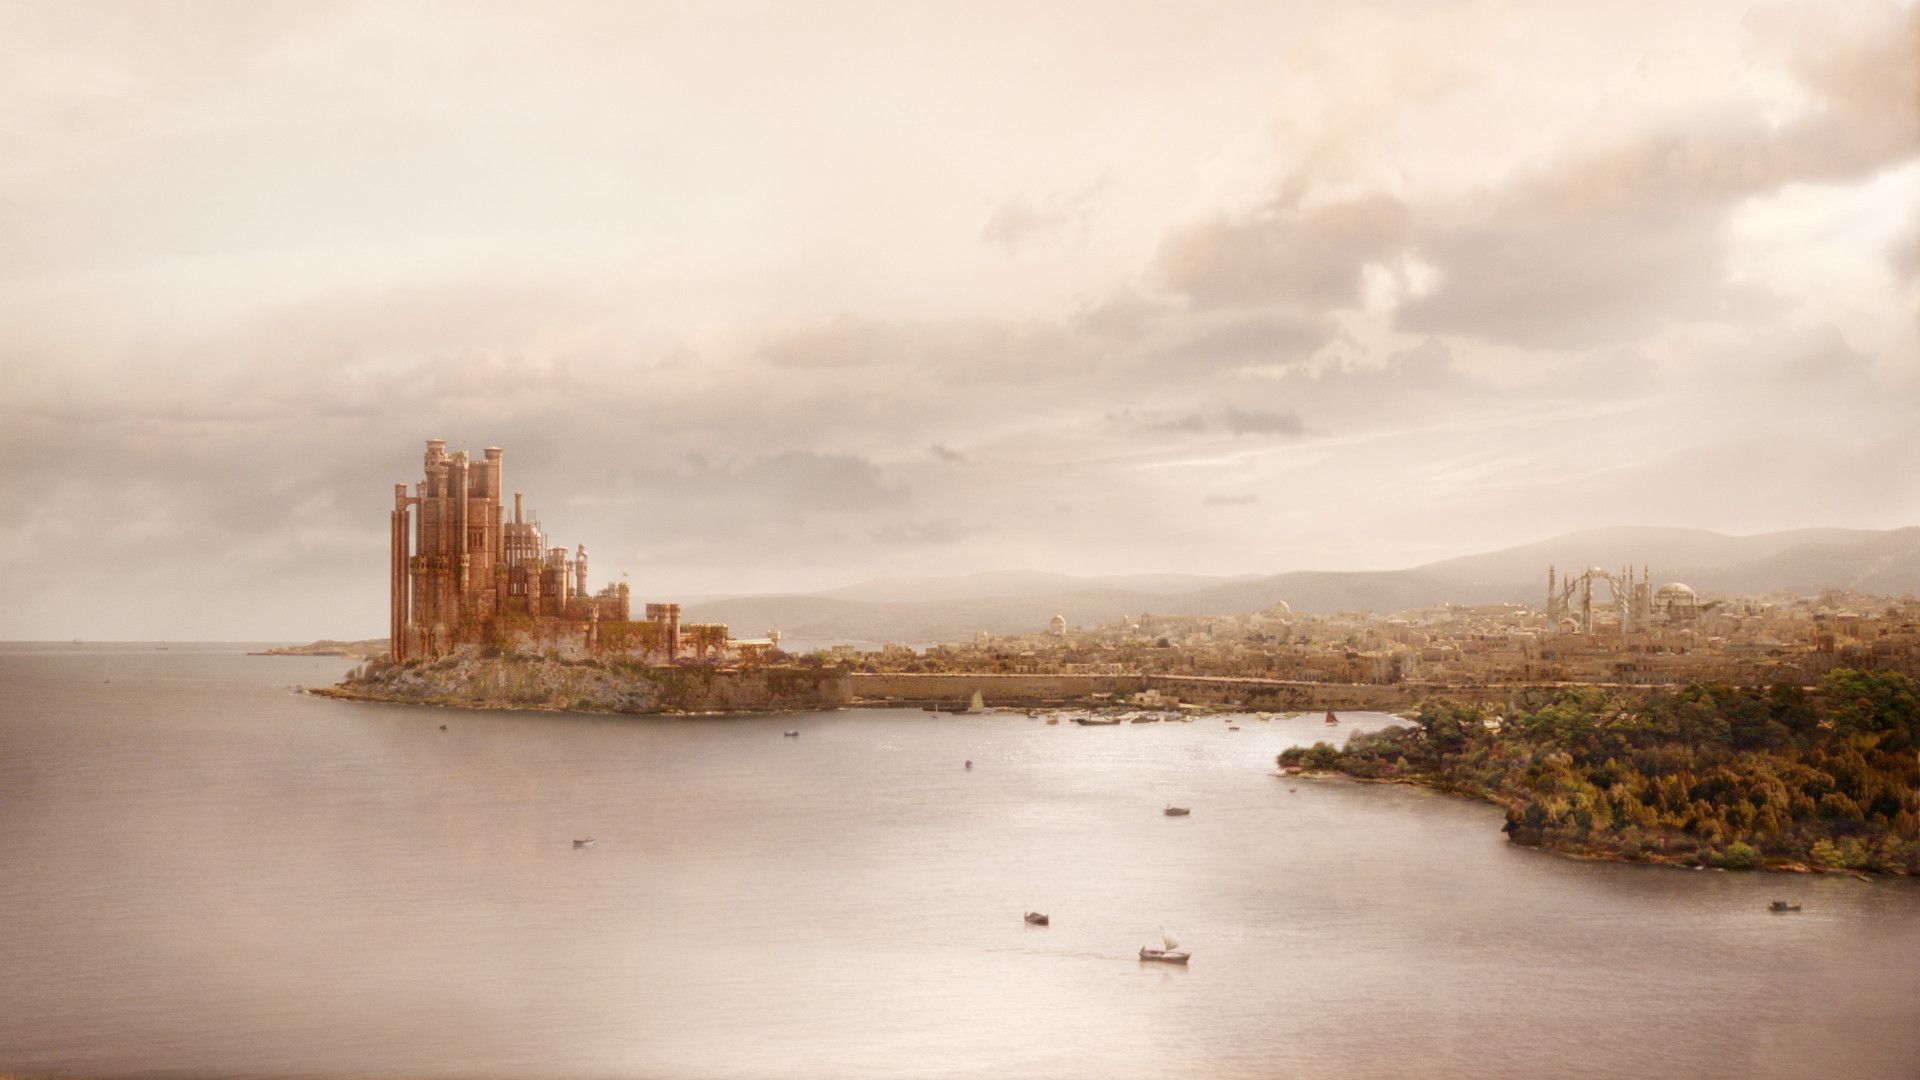 Game of Thrones' scenery wallpaper